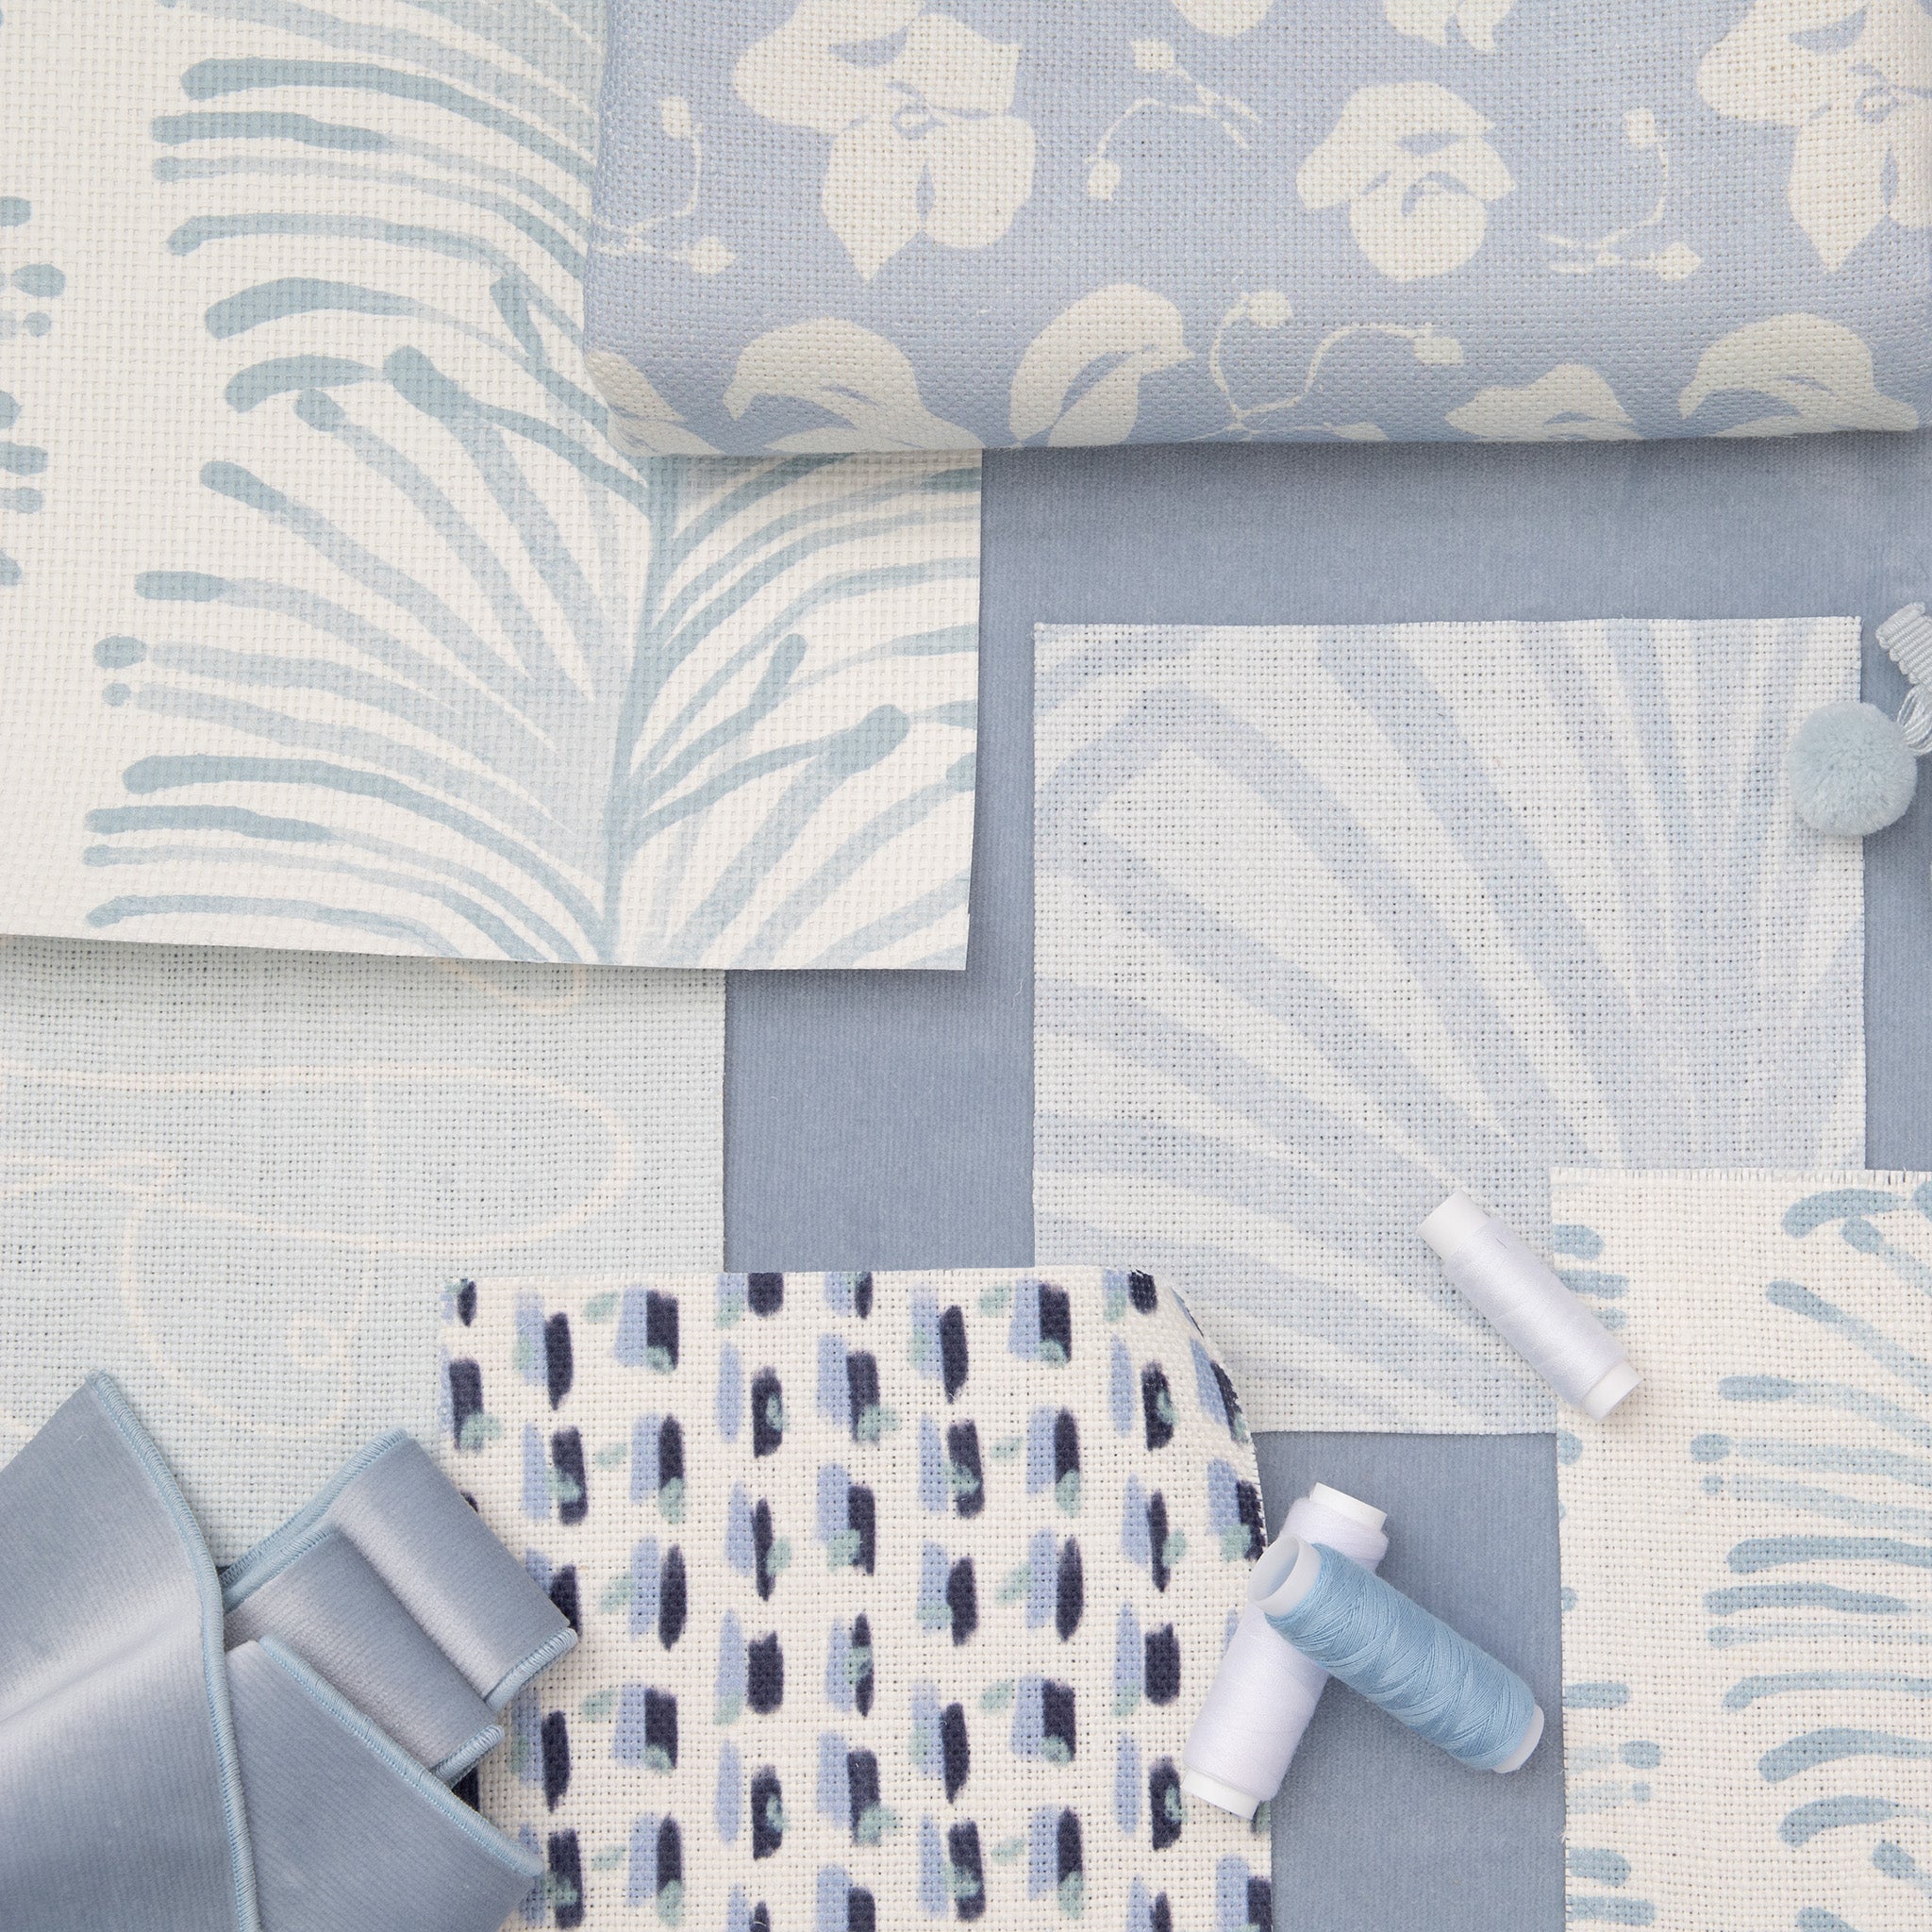 Interior design moodboard and fabric inspirations with Sky Blue Botanical Stripe Printed Swatch, Sky and Navy Blue Poppy Printed Swatch, and Sky Blue Palm Printed Swatch 